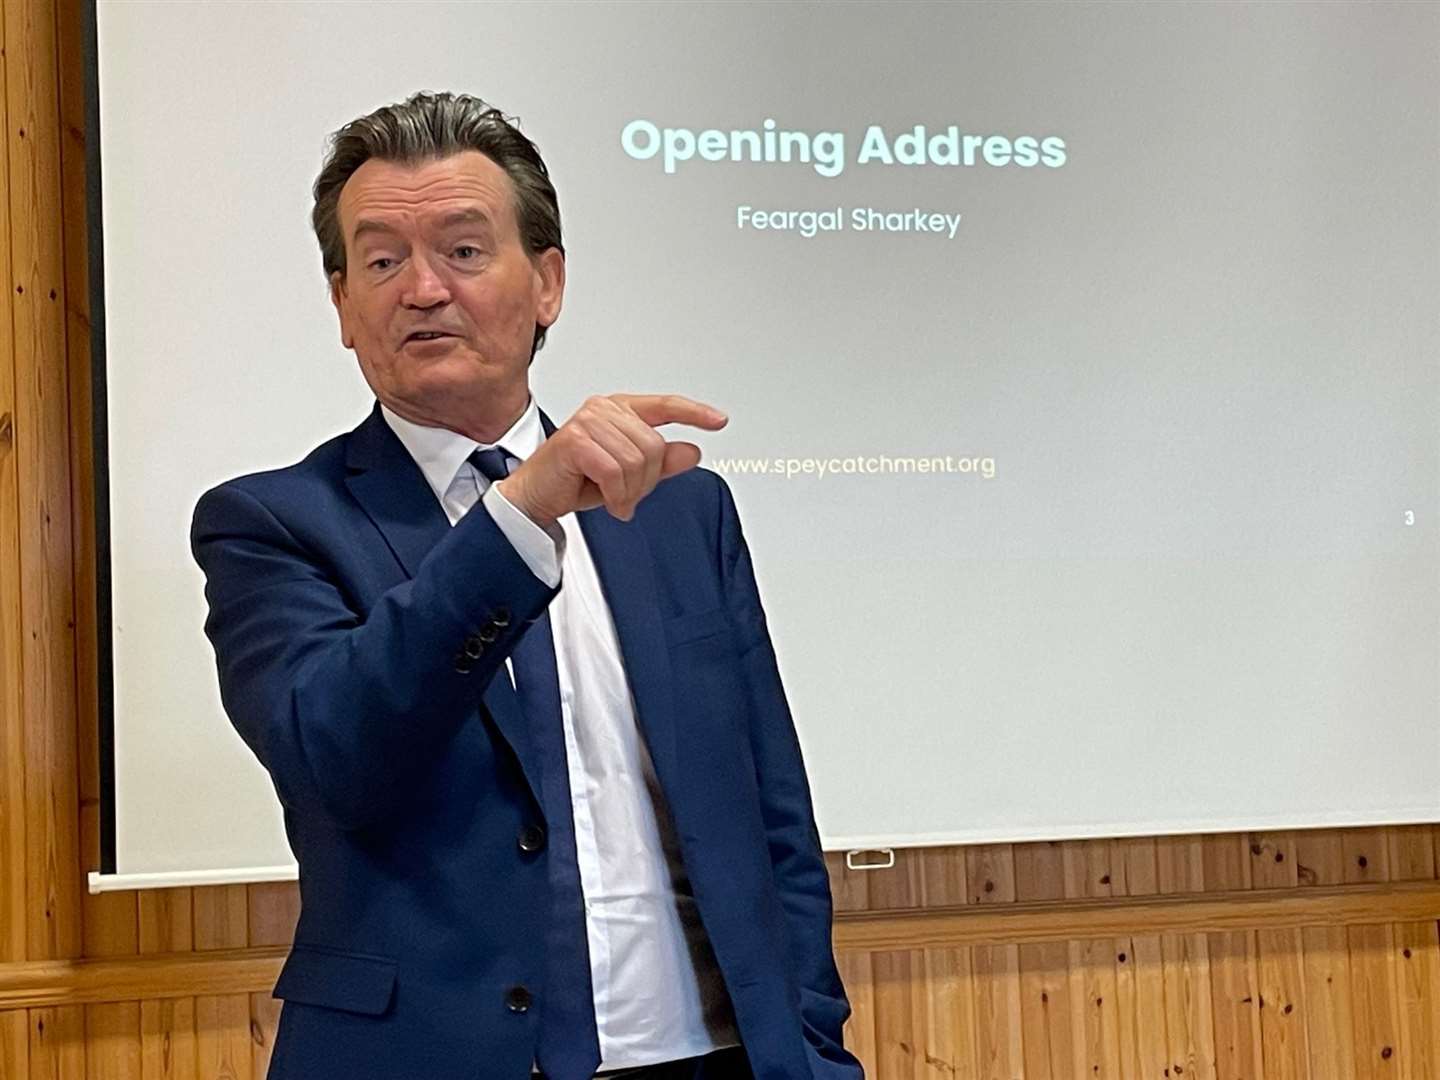 Feargal Sharkey was the special guest speaker at the event to promote habitat restoration of the River Spey catchment area.